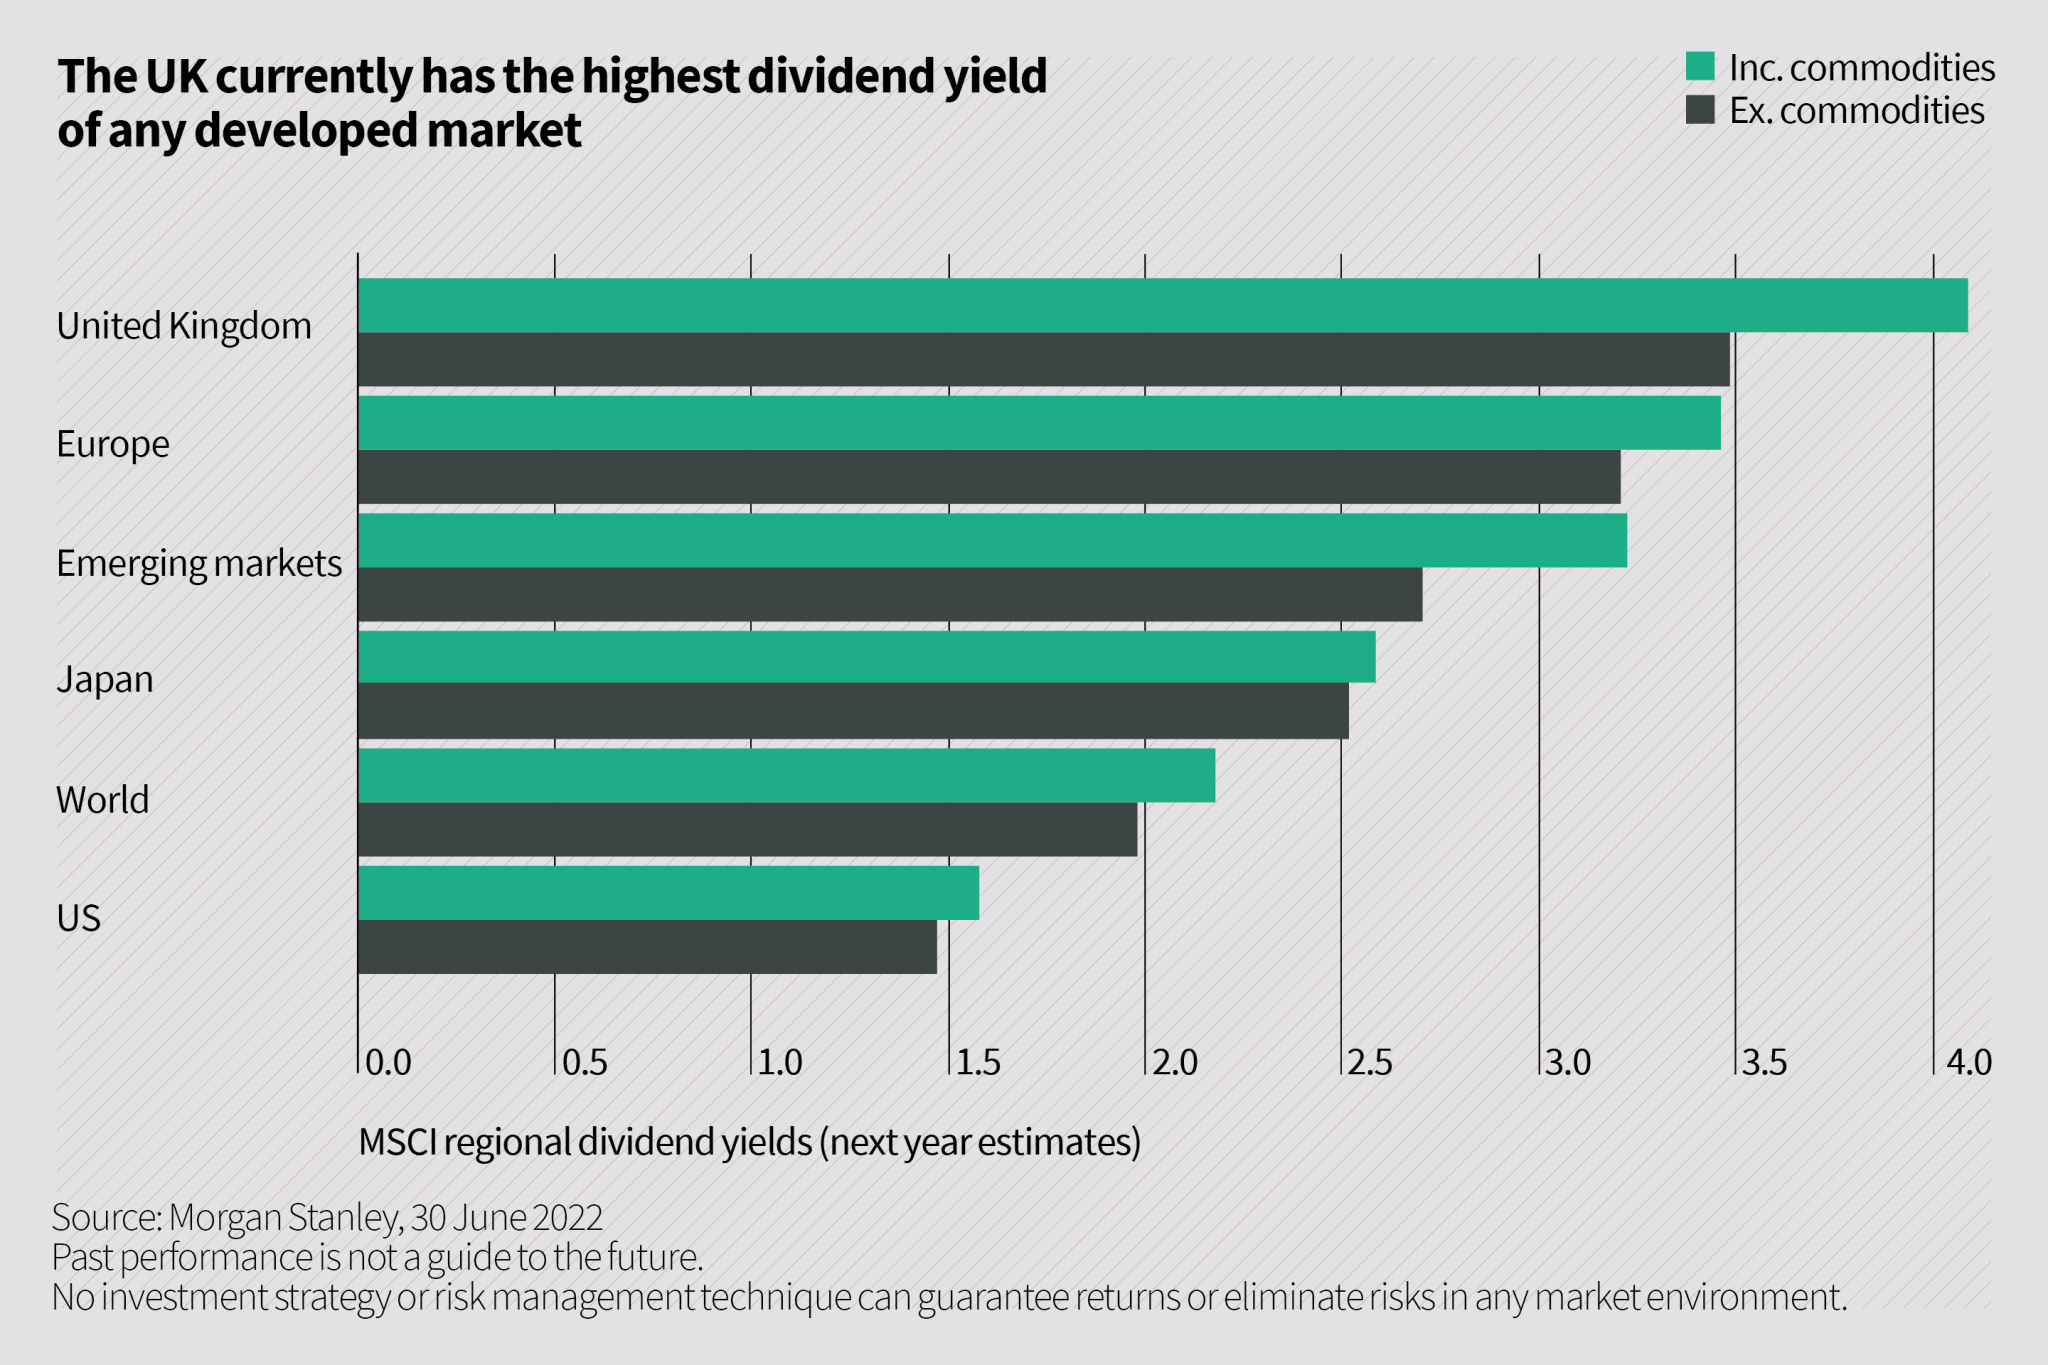 The UK currently has the highest dividend yield of any developed market